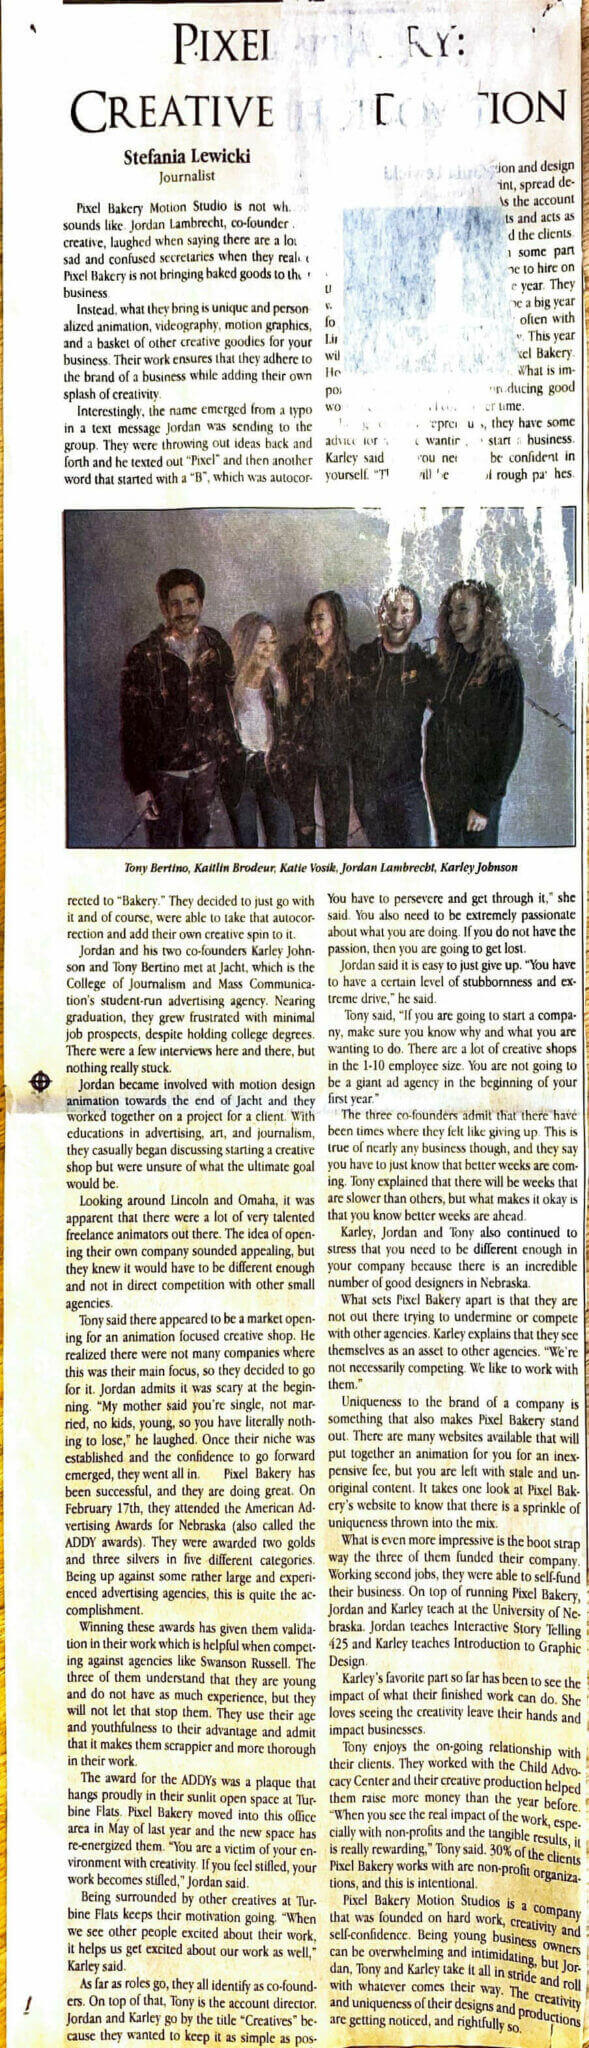 This is a scan of a newspaper article clipping. The article has disappeared off of the web and the original publication, LNK News, is now defunct.